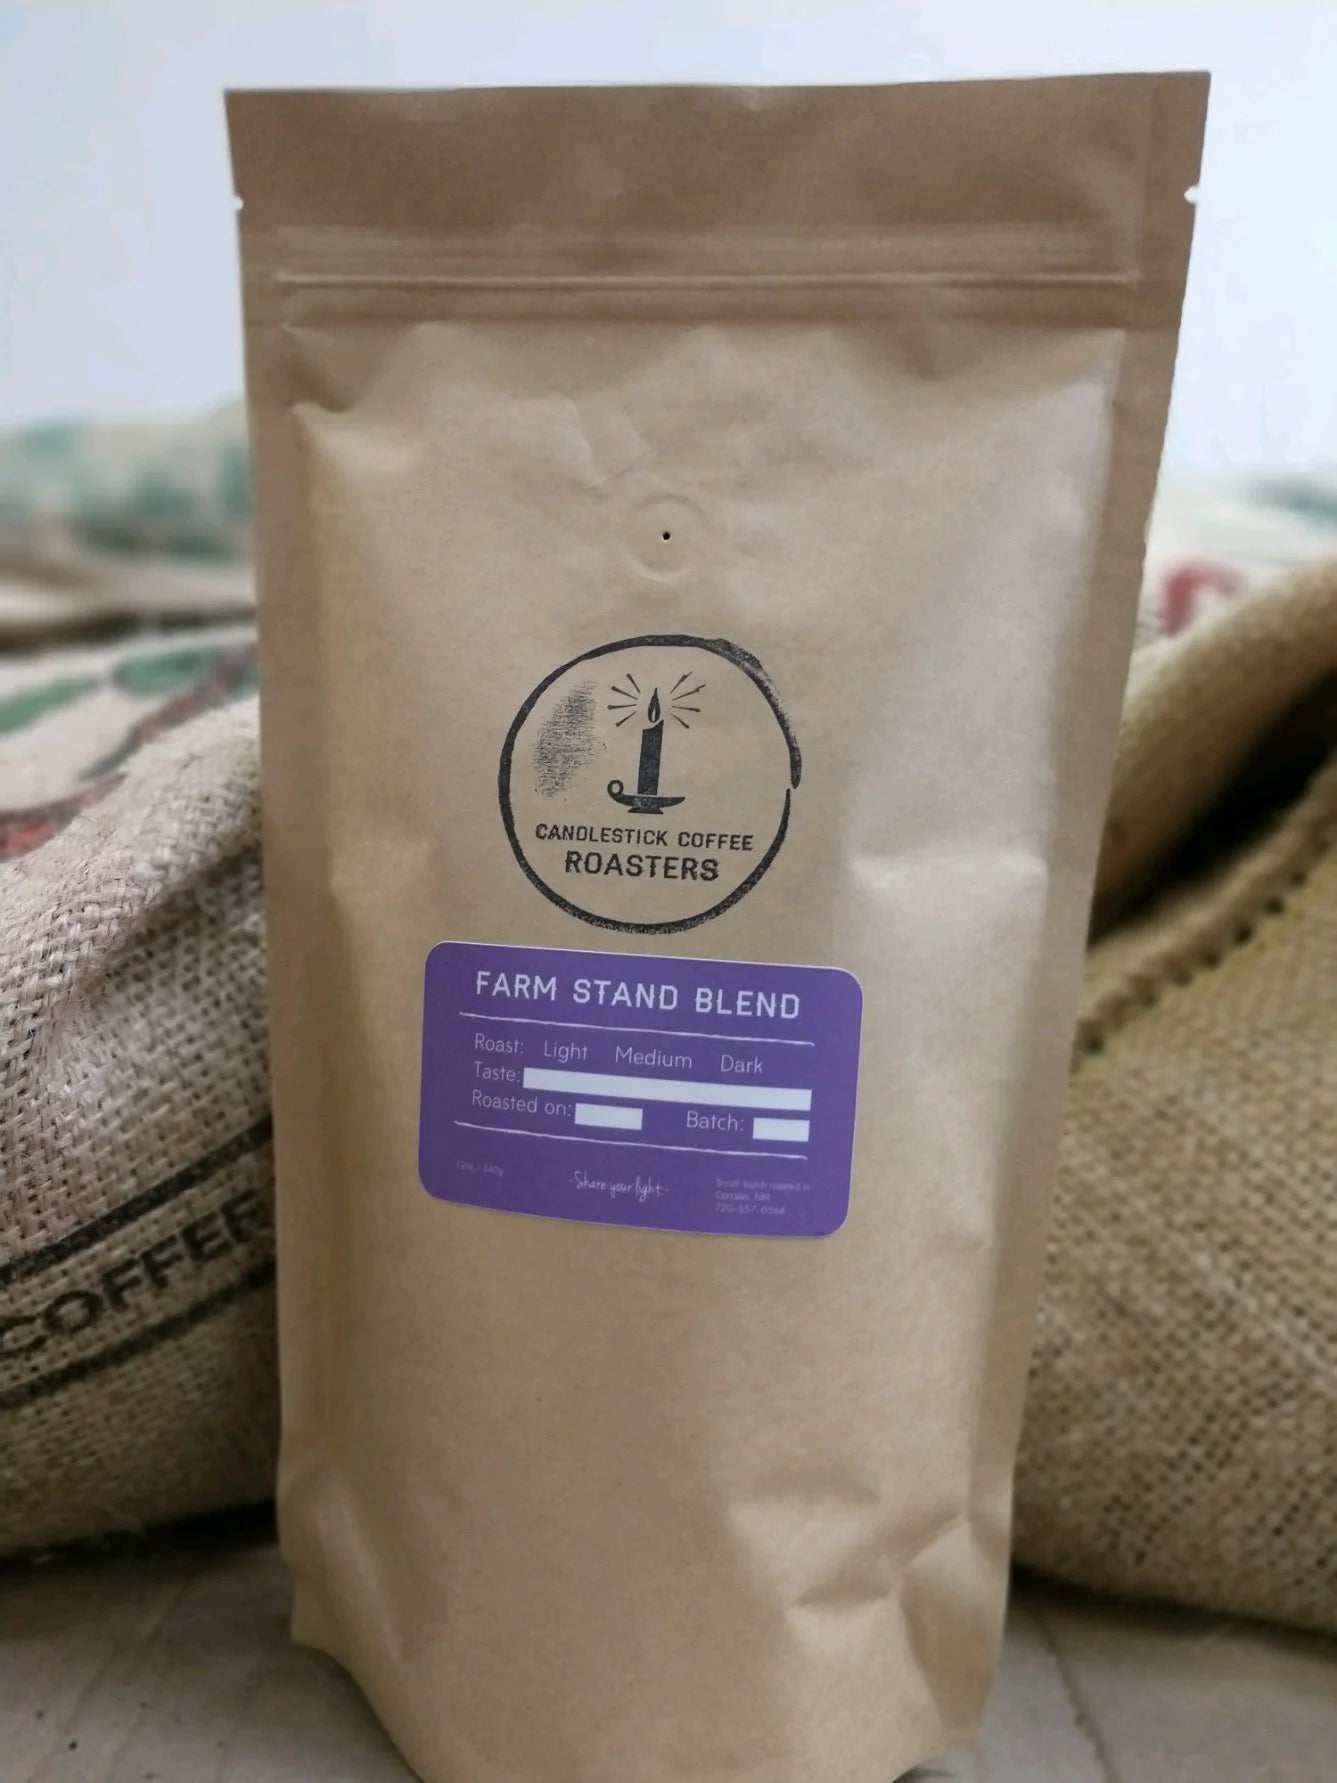 A bag of locally roasted Candlestick Coffee, Farm Stand Blend